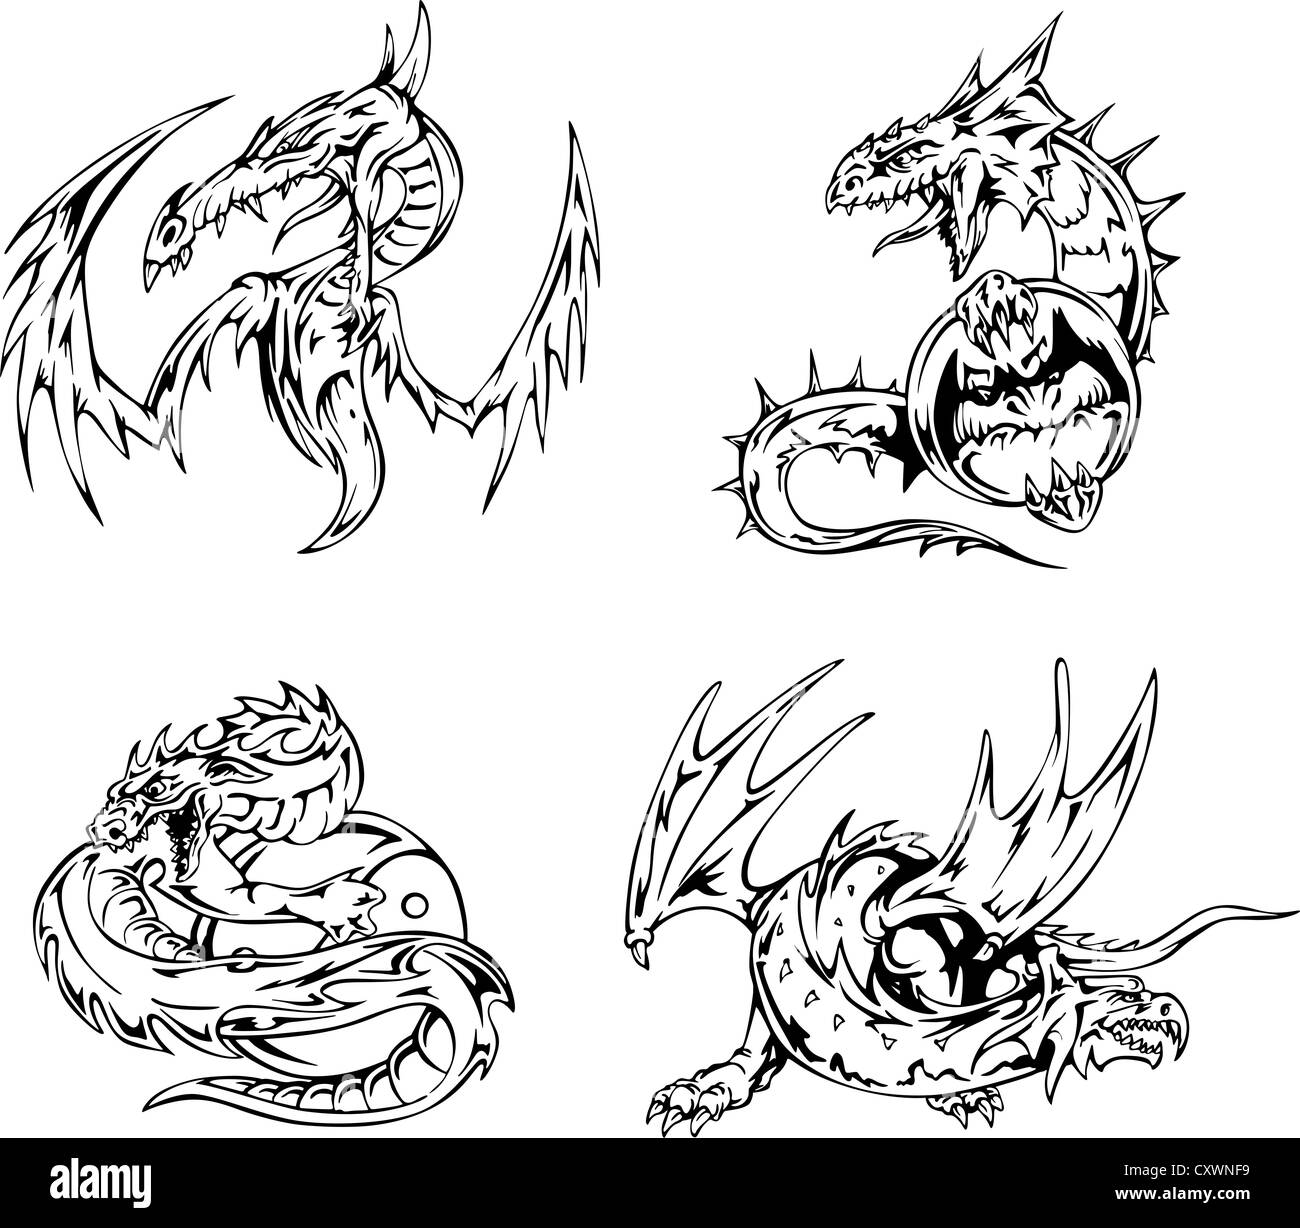 Dragon tattoos. Set of black and white vector illustrations. Stock Photo